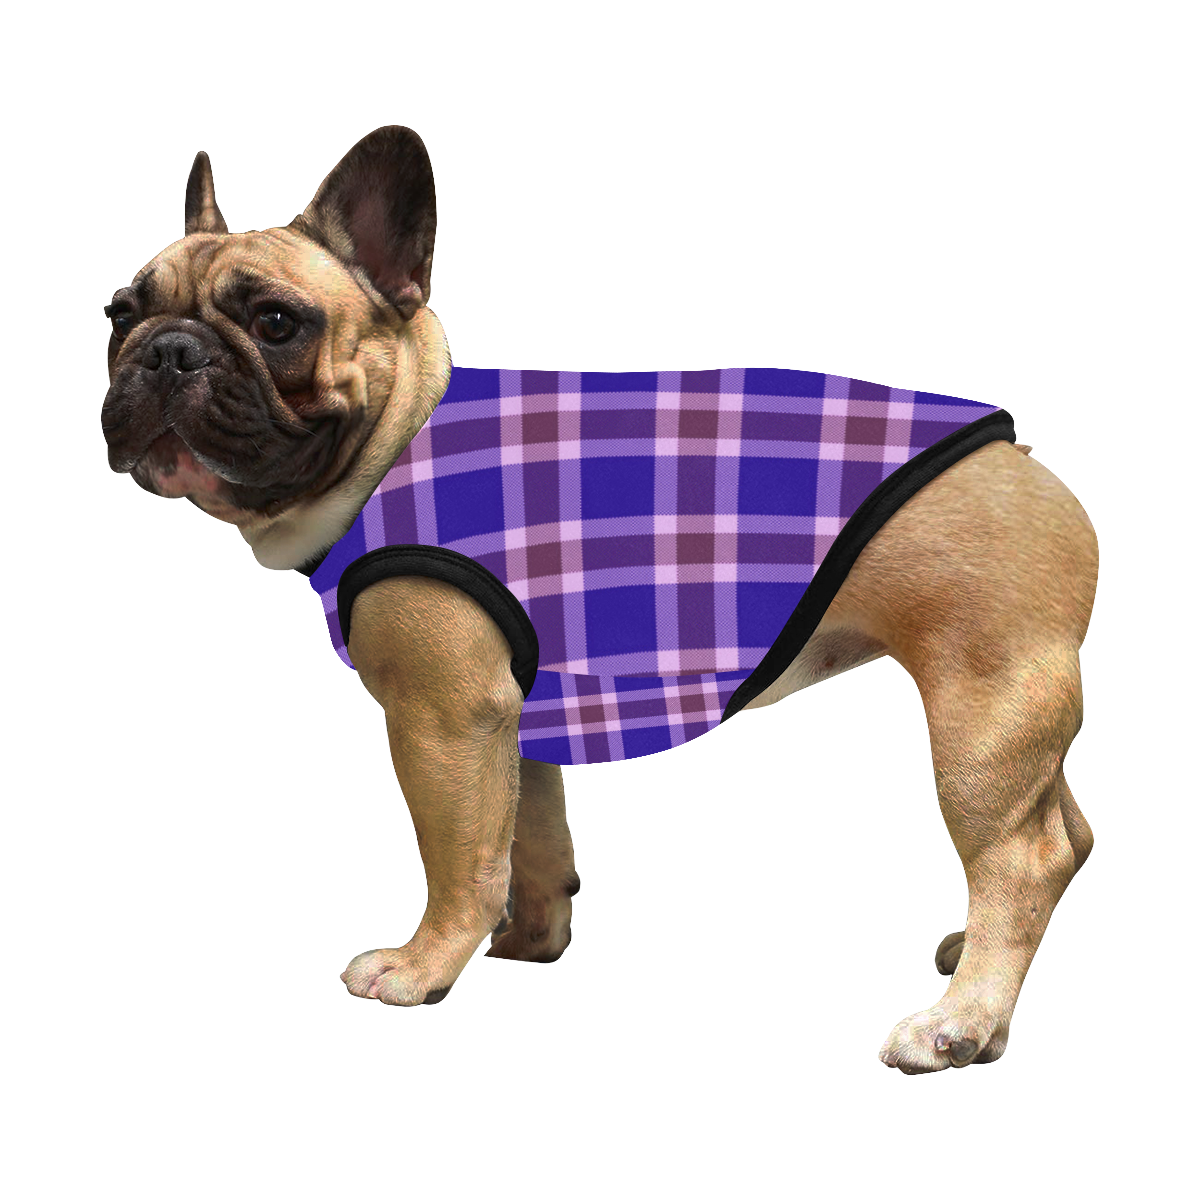 Navy Violet White Plaid All Over Print Pet Tank Top